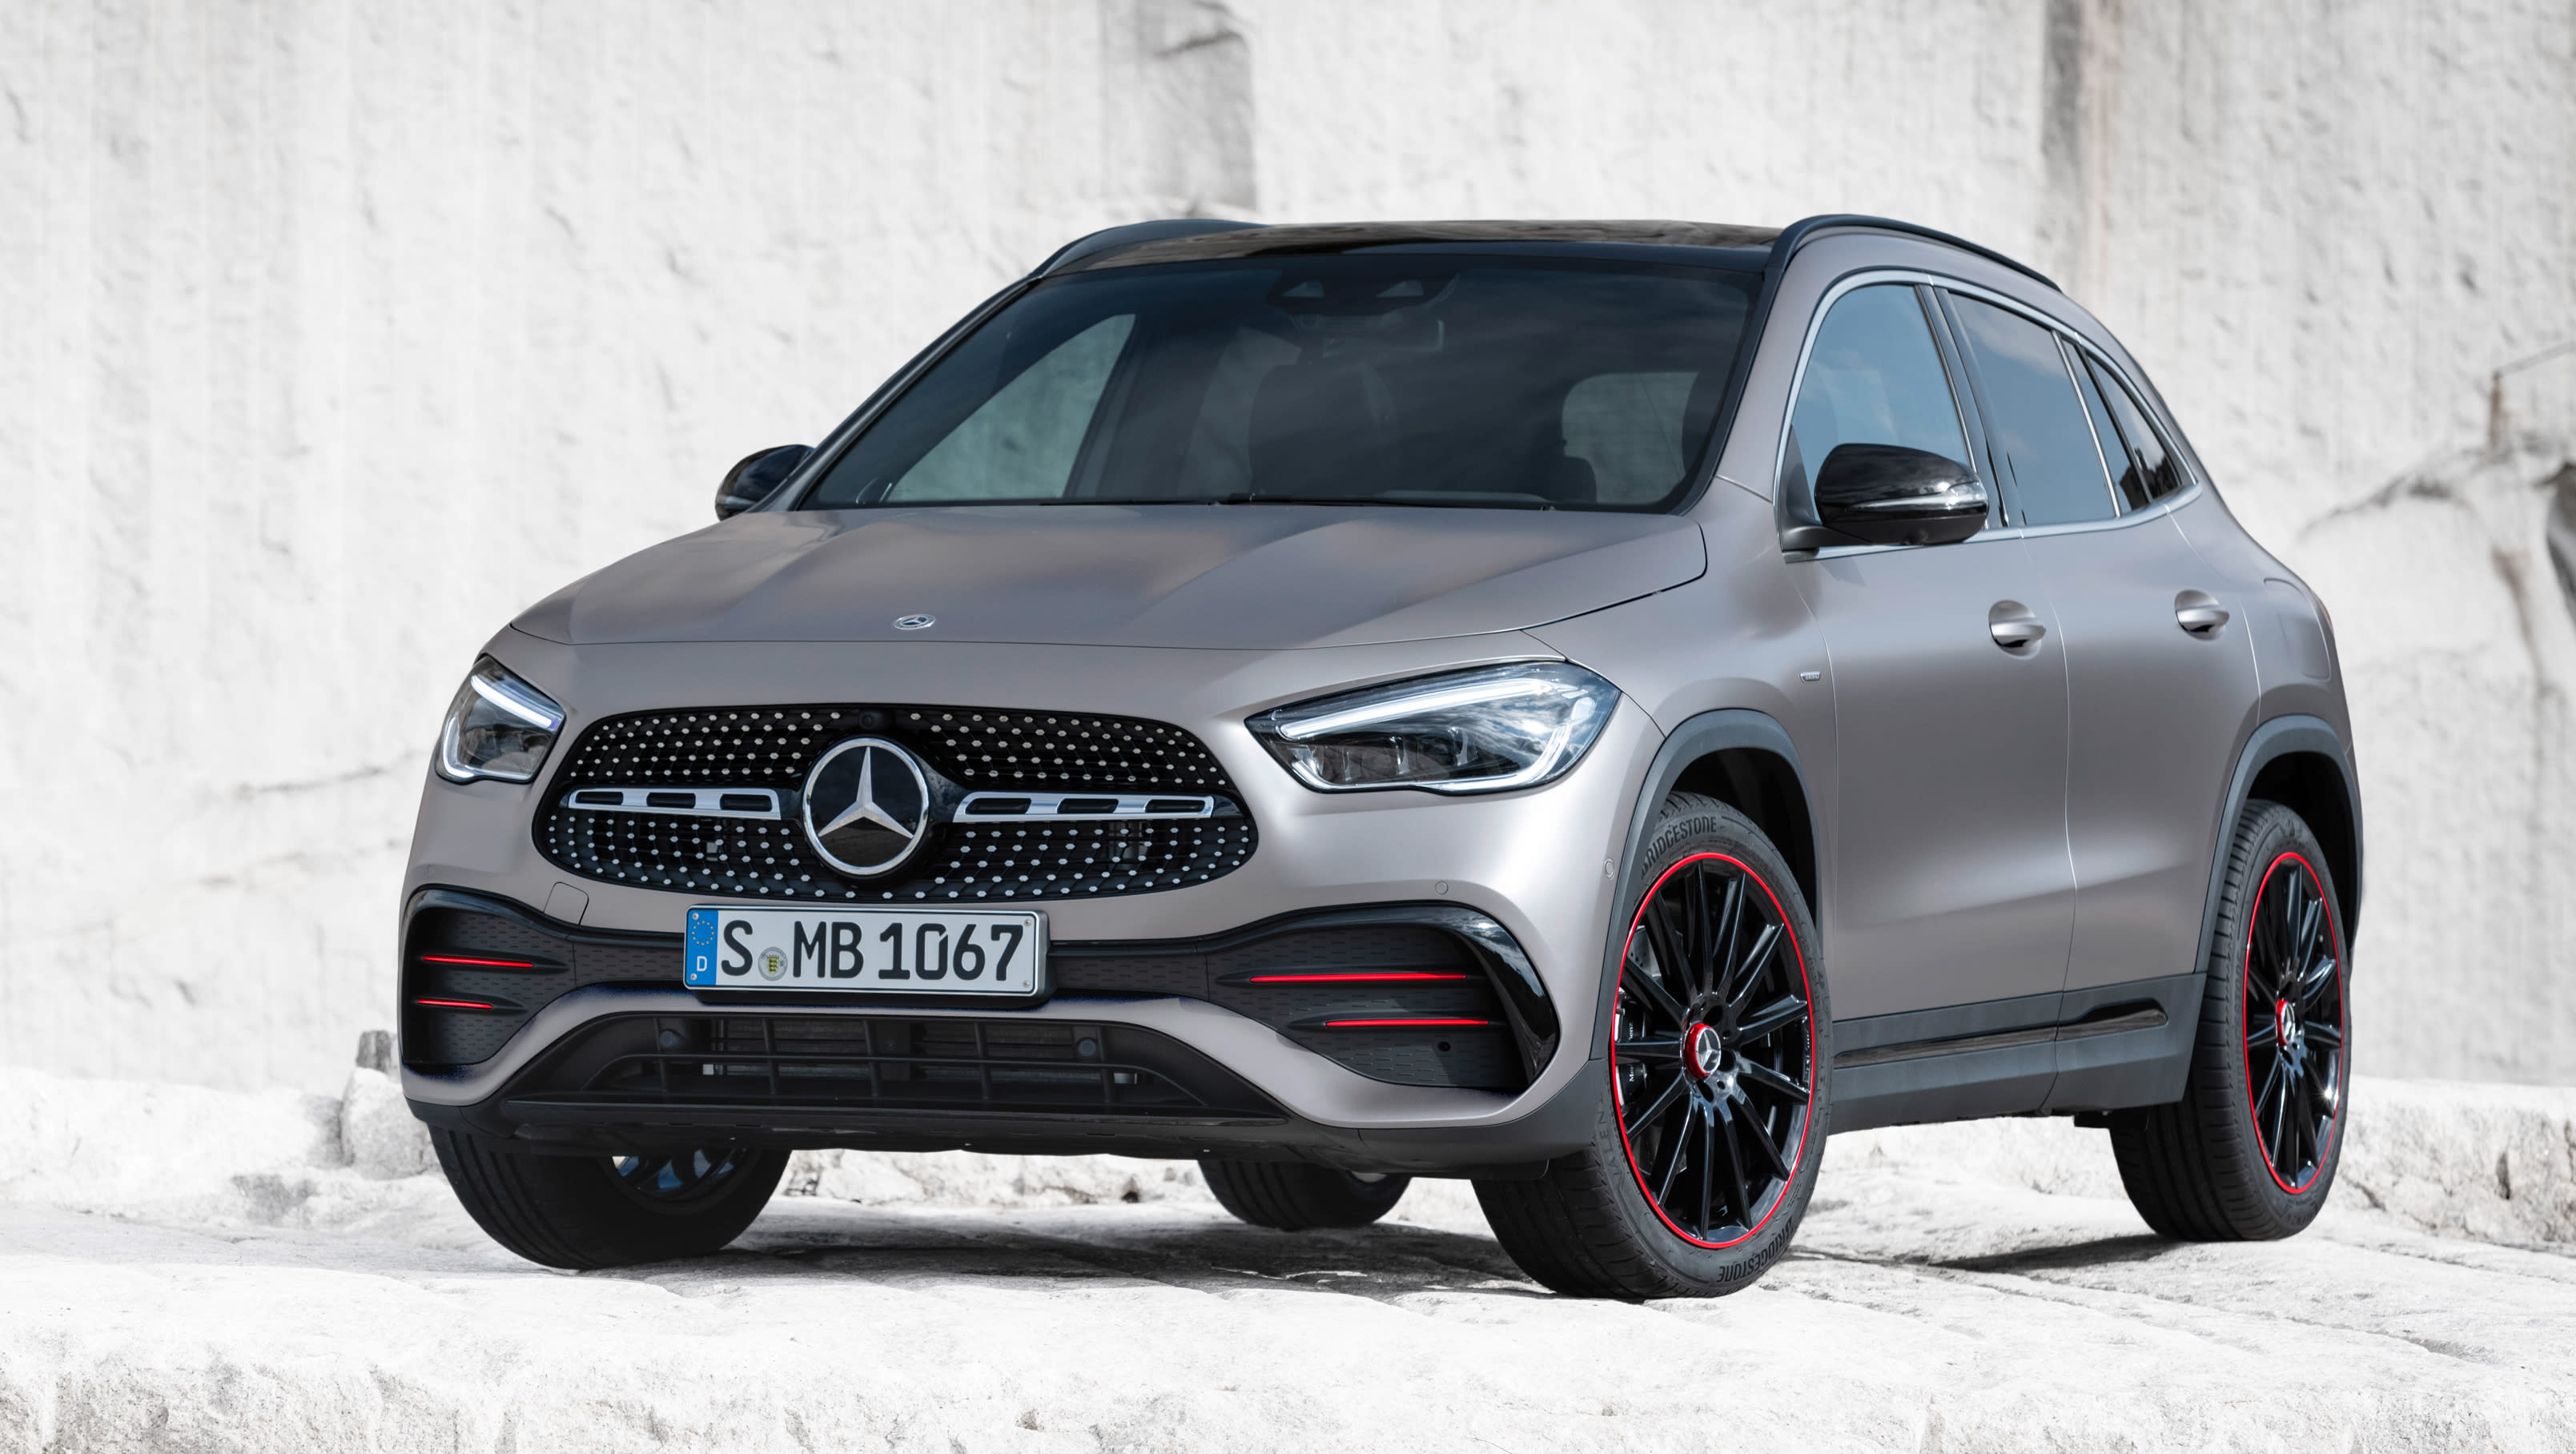 New Mercedes-Benz GLA 2020: Small SUV range detailed ahead of Q3 launch